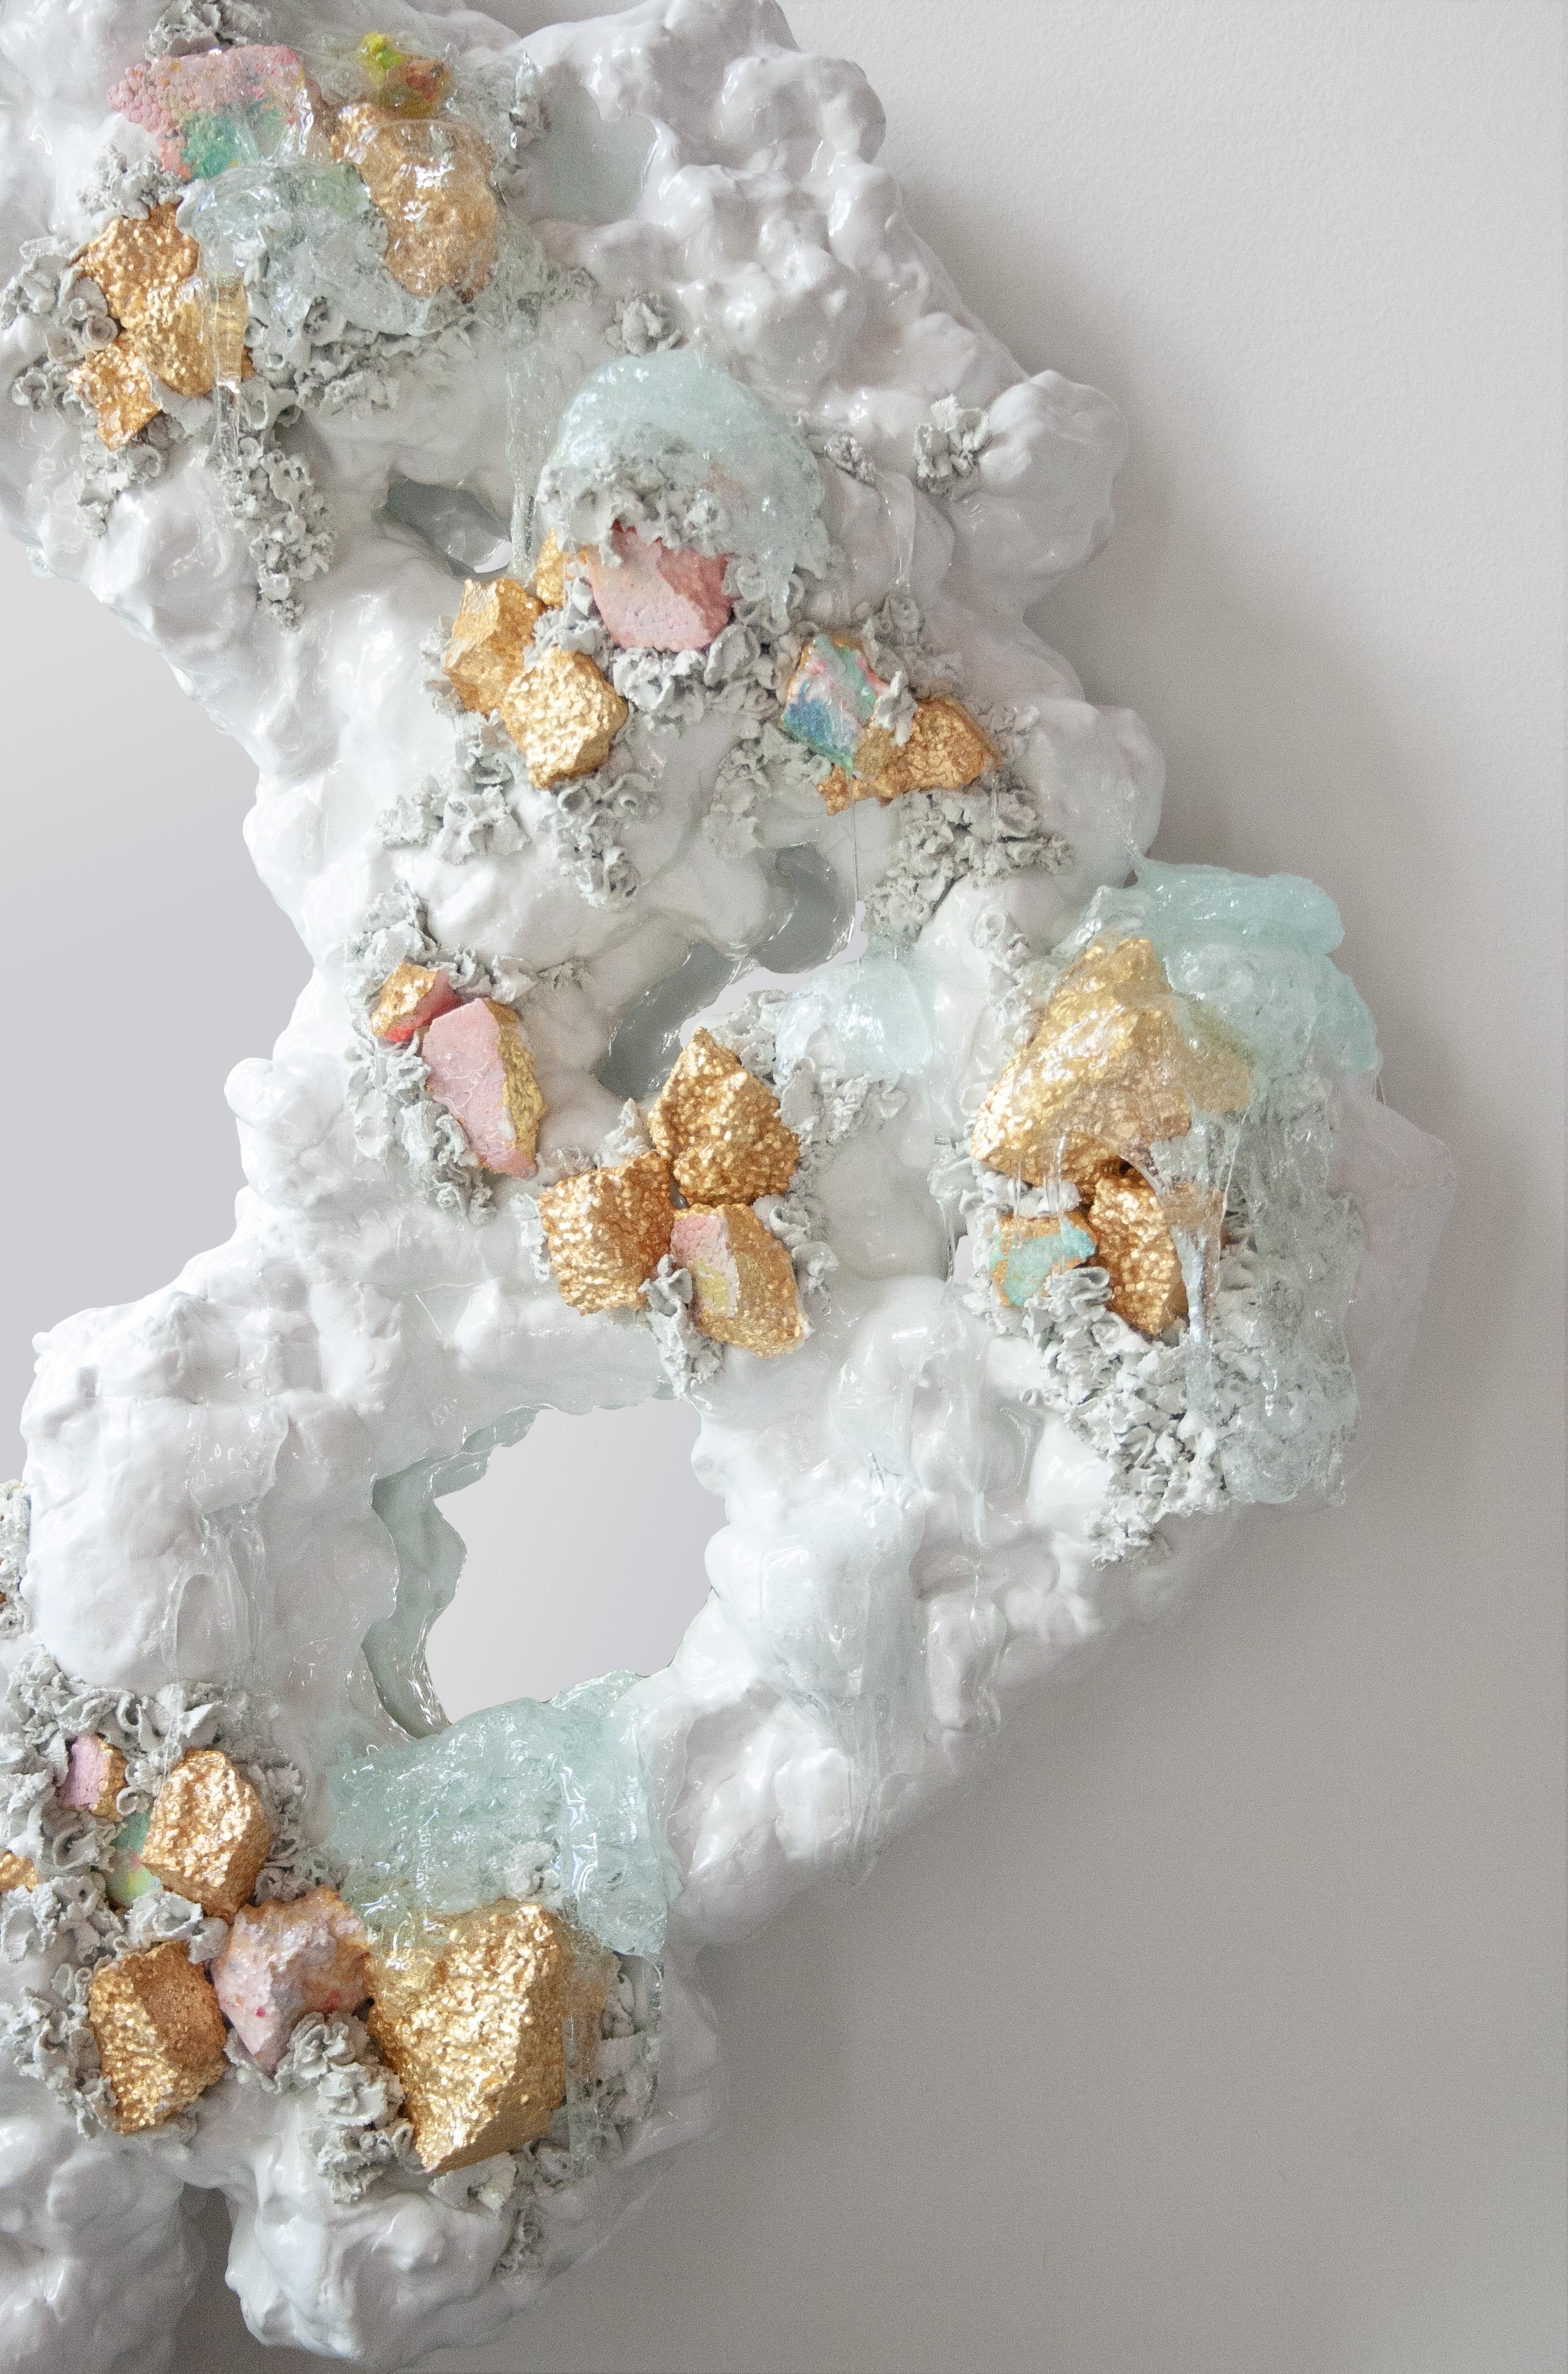 GLEANING by ALEKSANDRA POLLNER
Gleaning in this body of work is a gathering of cultural and material leftovers by highlighting and utilizing
found and donated styrofoam which has undergone numerous treatments and embalming techniques.
Formed